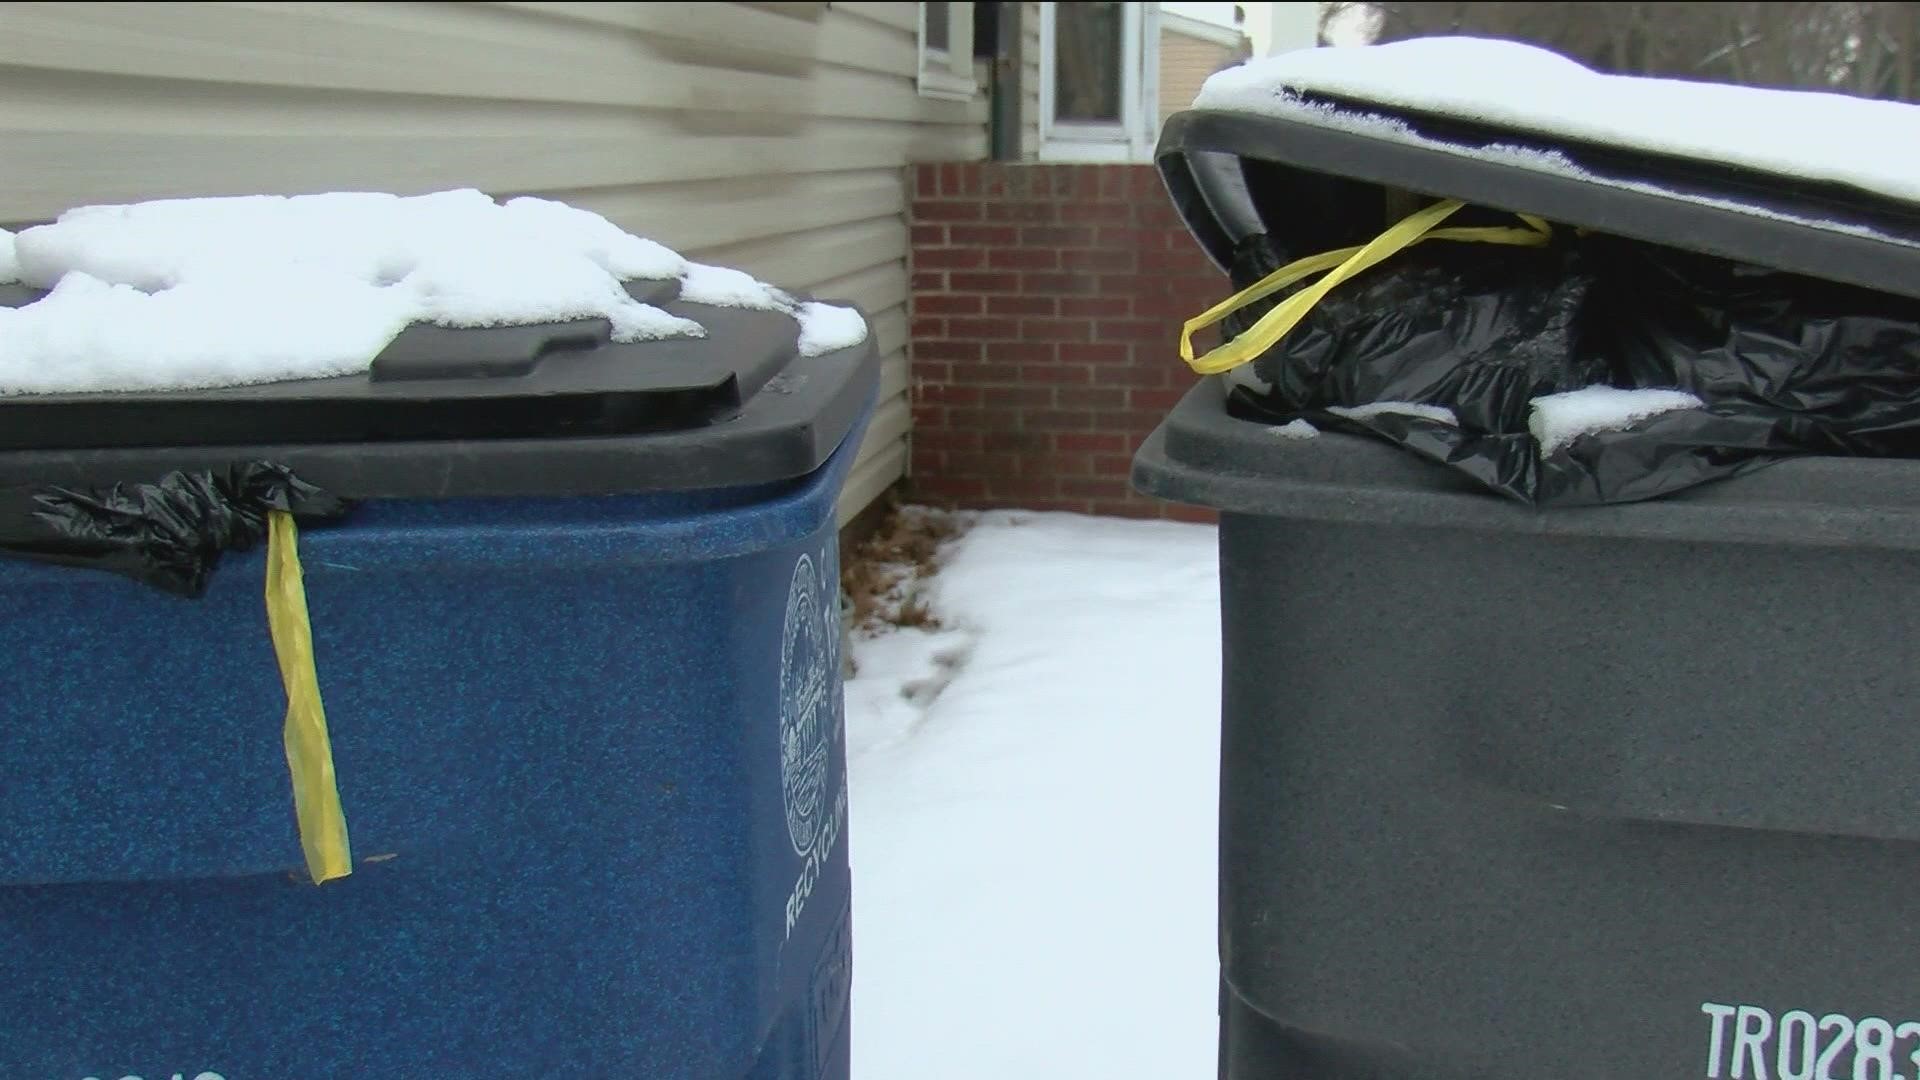 Trash and recycling collection will not be impacted by the holiday week to start off 2023, Republic Services said. The company services the greater Toledo area.